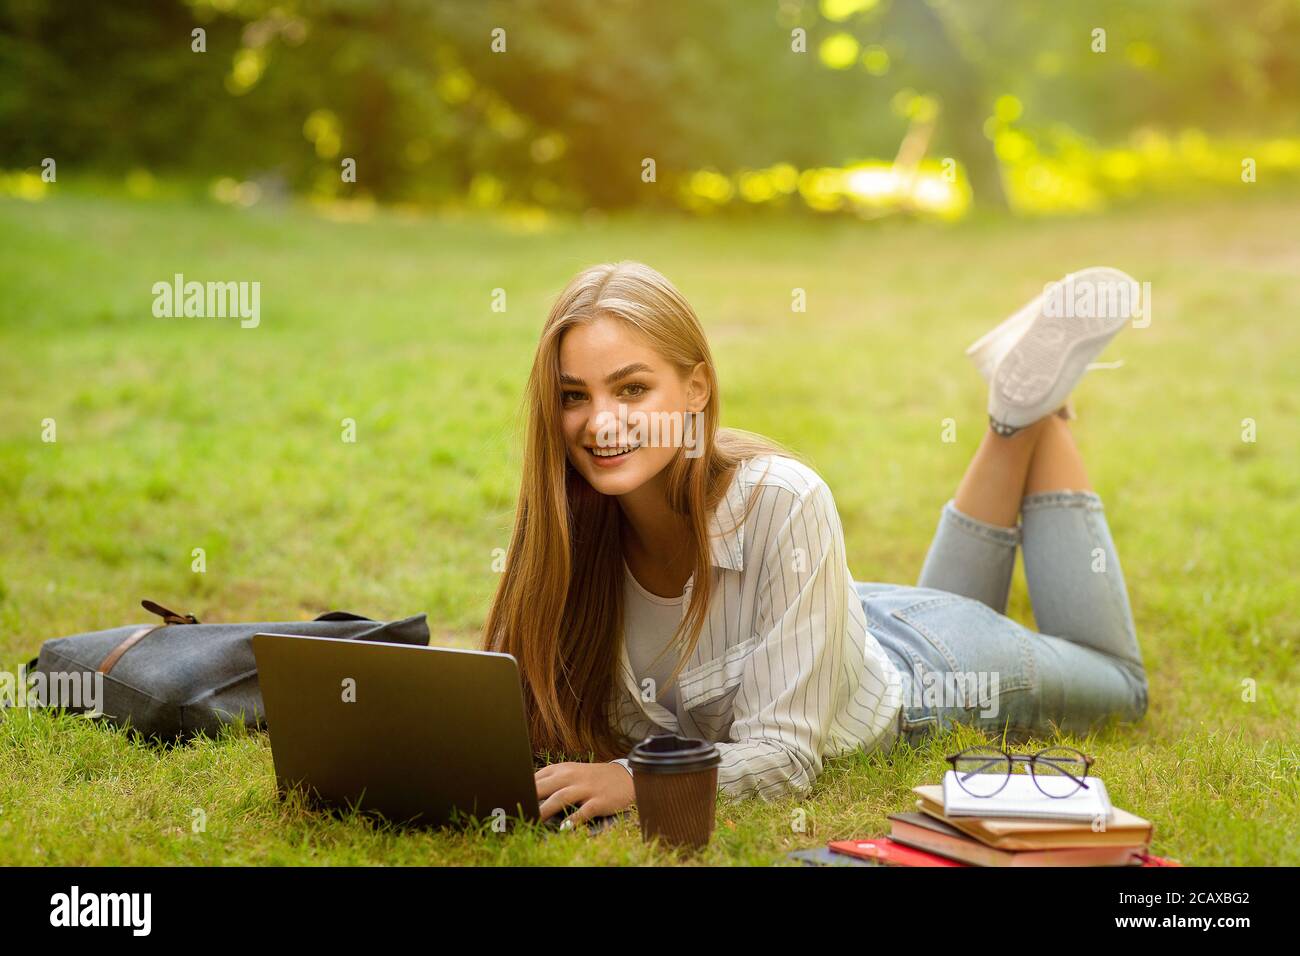 Online Education And Distance Learning. Beautiful Ten Girl Studying With Laptop Outdoors Stock Photo